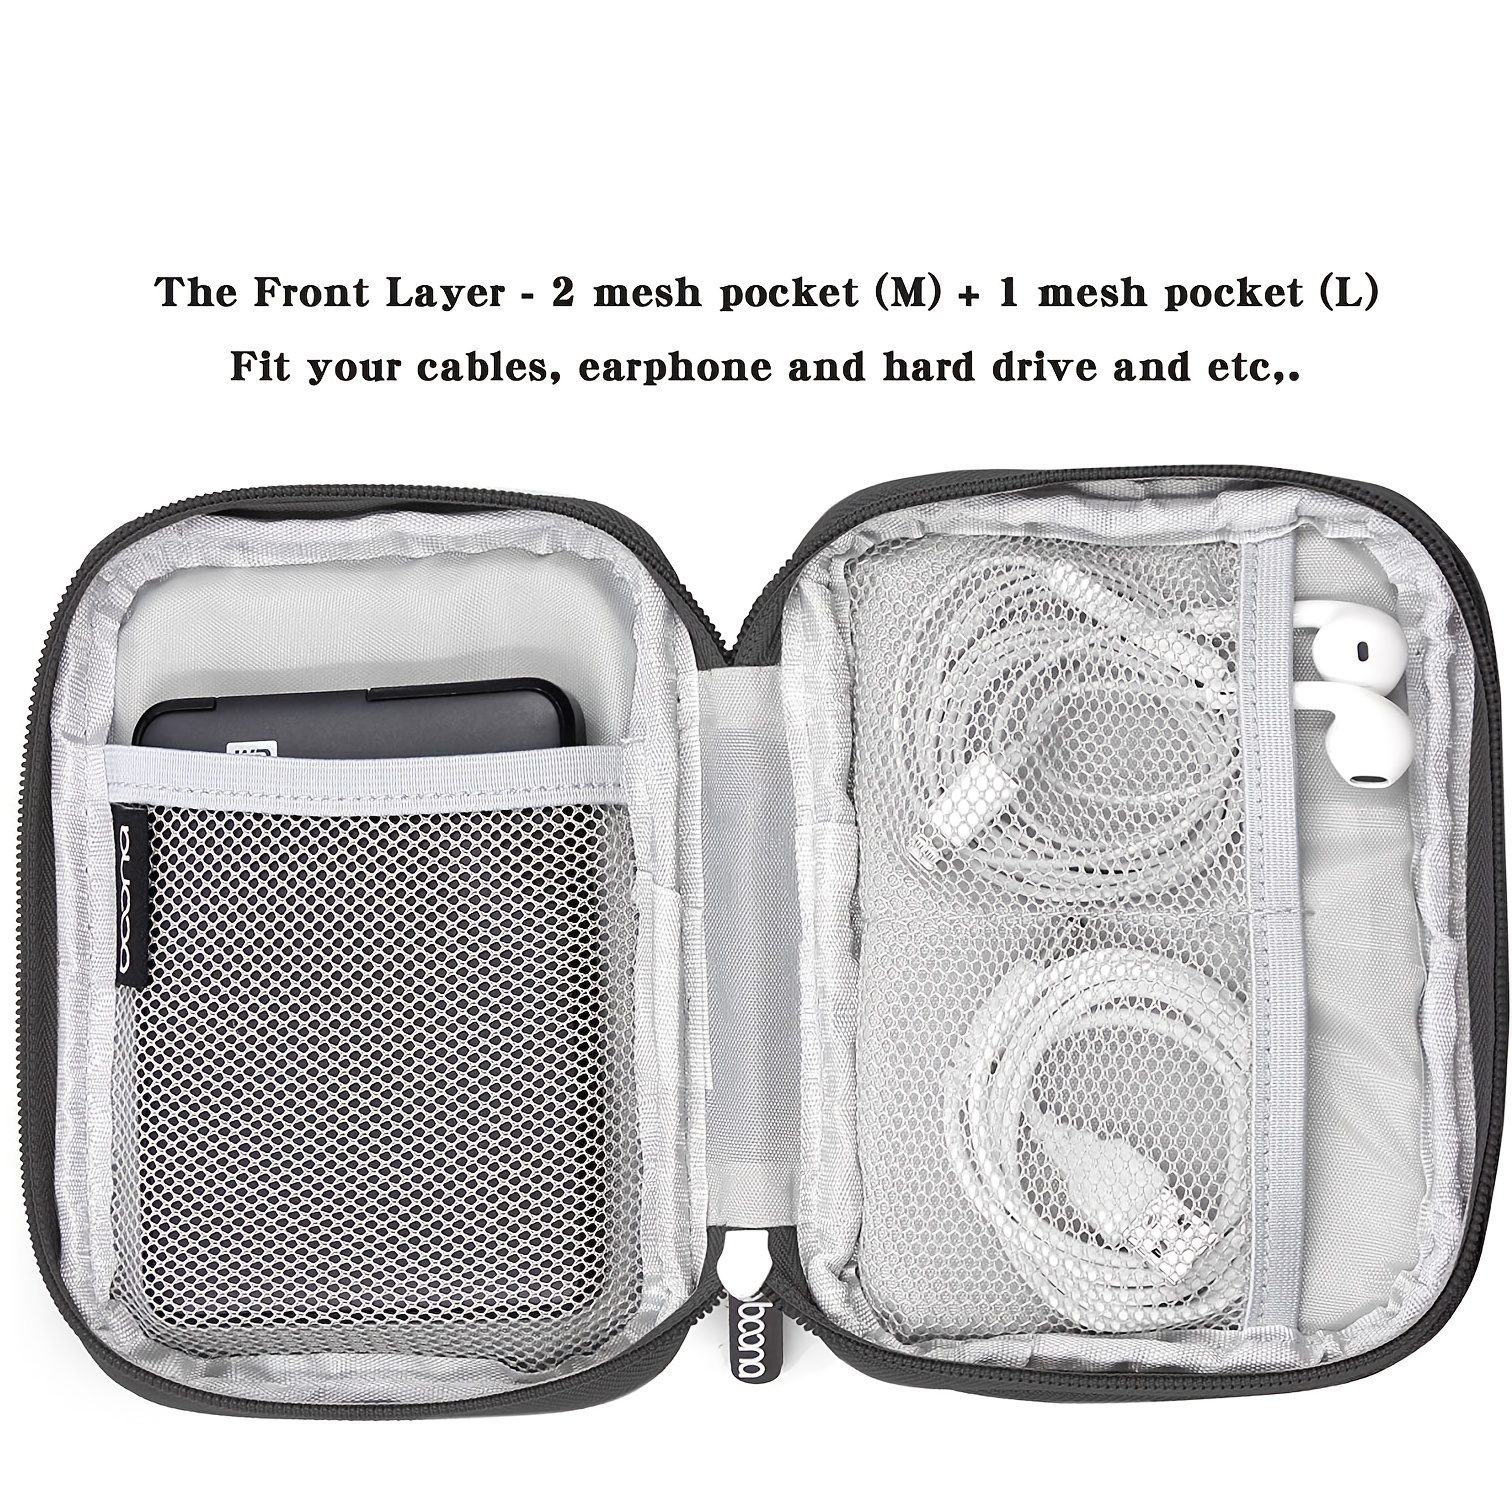 Dropship Electronics Organizer Travel Cable Organizer Bag Waterproof  Portable Digital Storage Bag Electronic Accessories Case Cable Charger Organizer  Case to Sell Online at a Lower Price